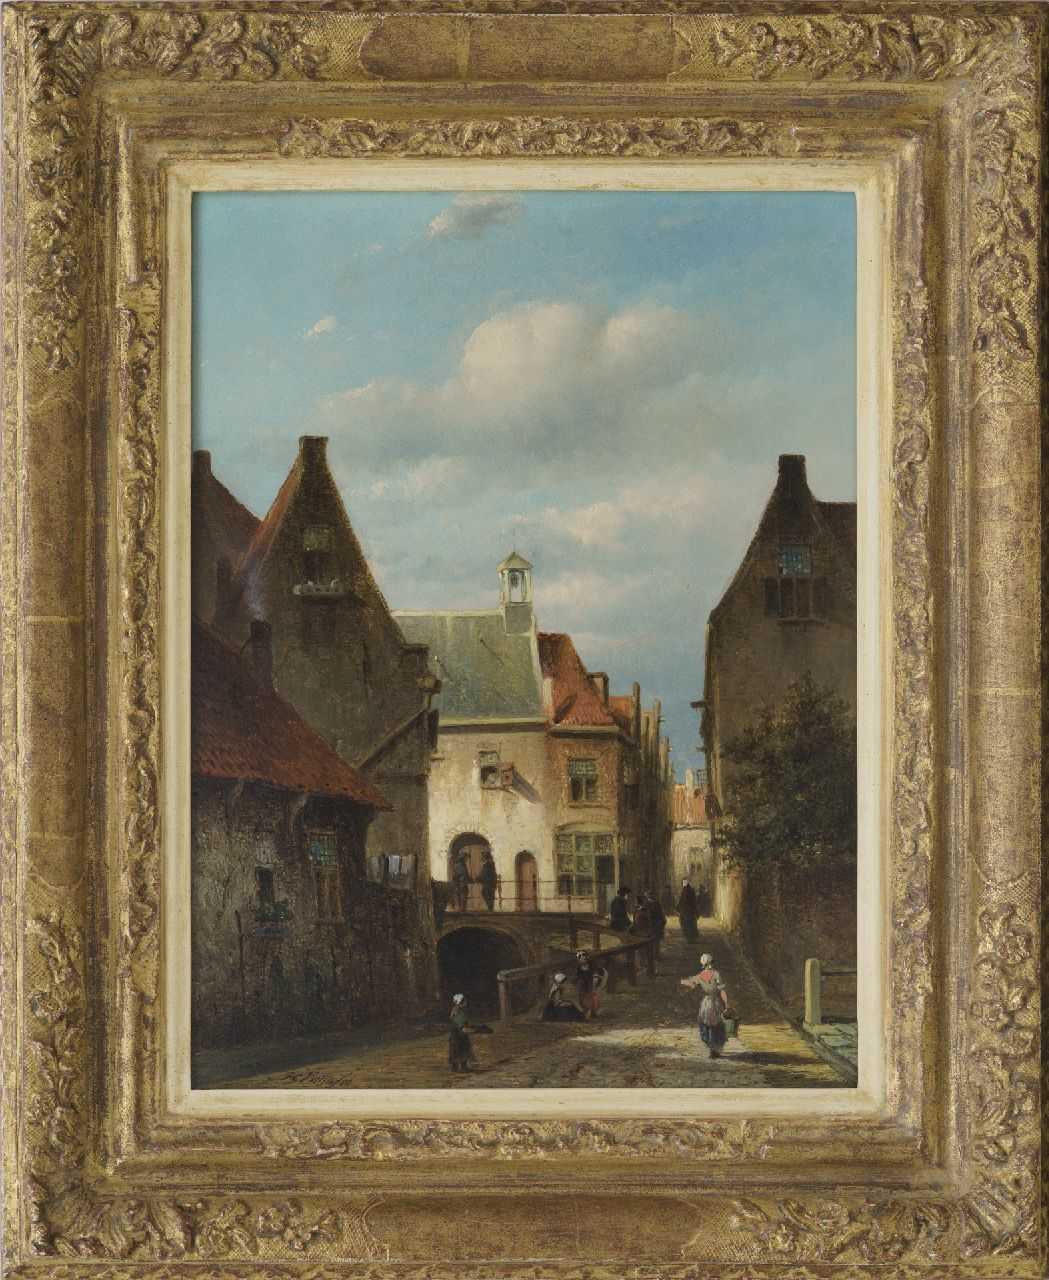 Vertin P.G.  | Petrus Gerardus Vertin, A view of the 'Zakkendragershuisje' and the 'Achterwater' in Delfshaven, Rotterdam, oil on panel 33.7 x 24.7 cm, signed l.l. and dated '56